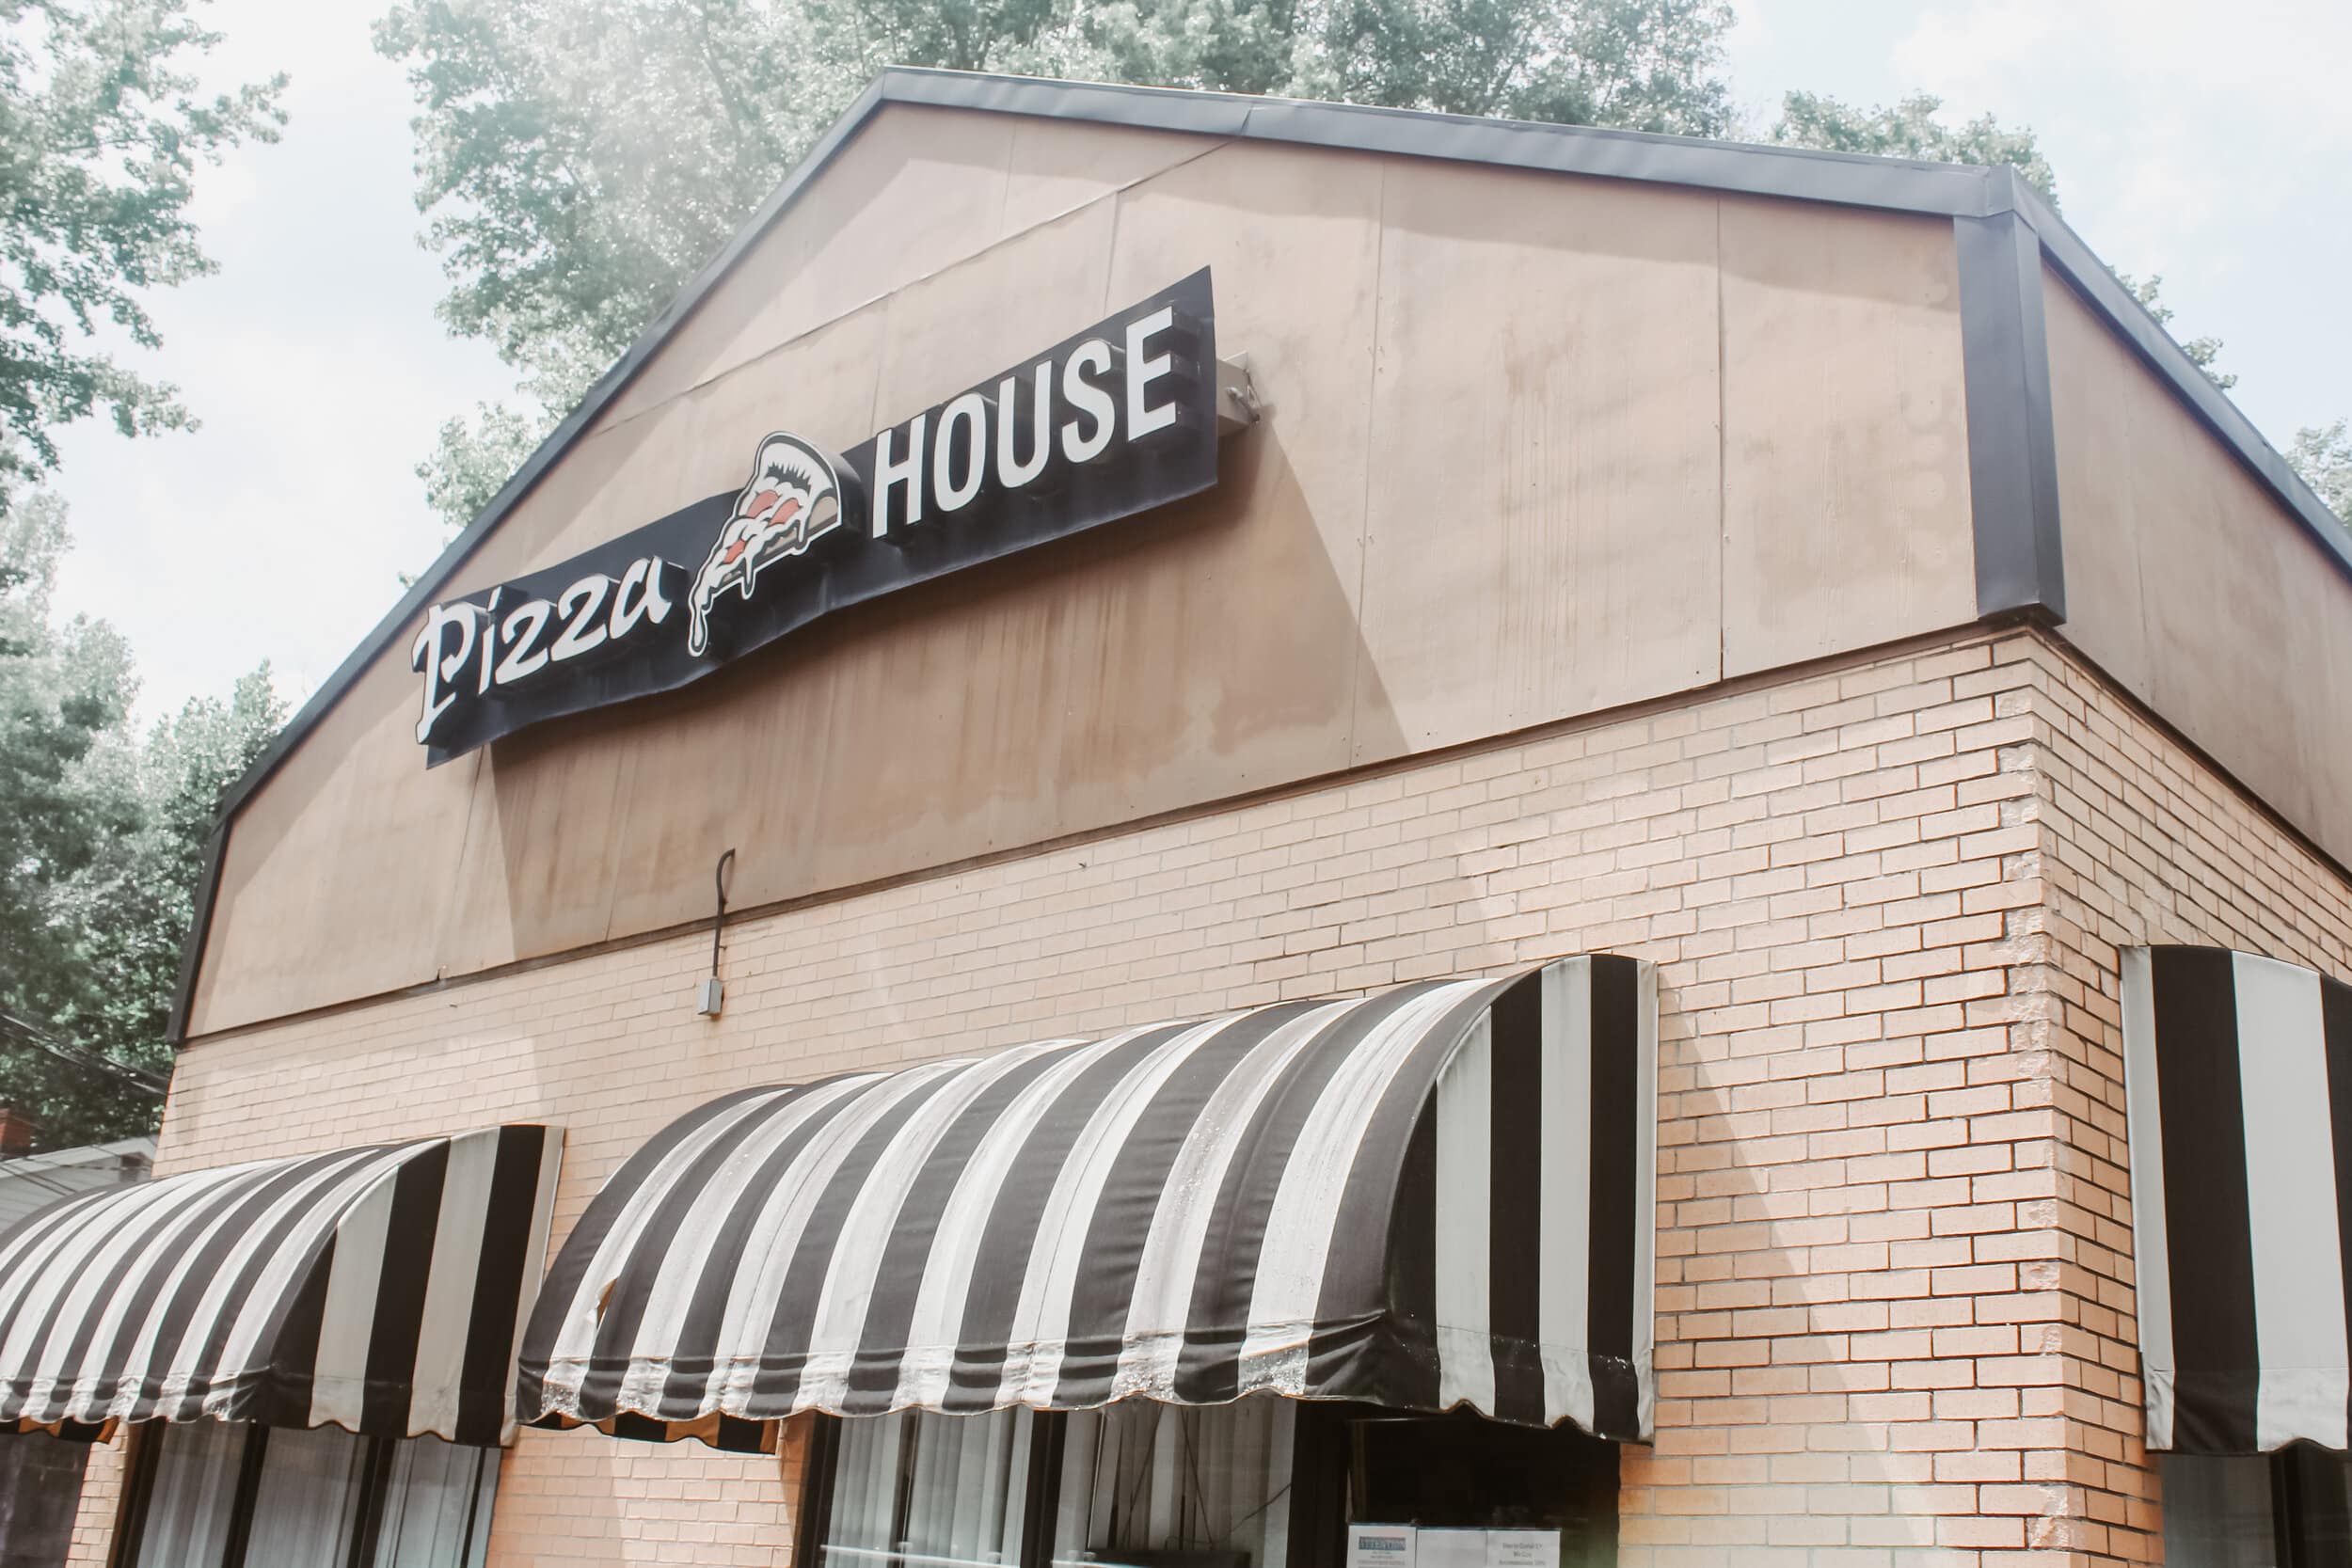 The front of the Pizza House building is depicted on a cloudy day.